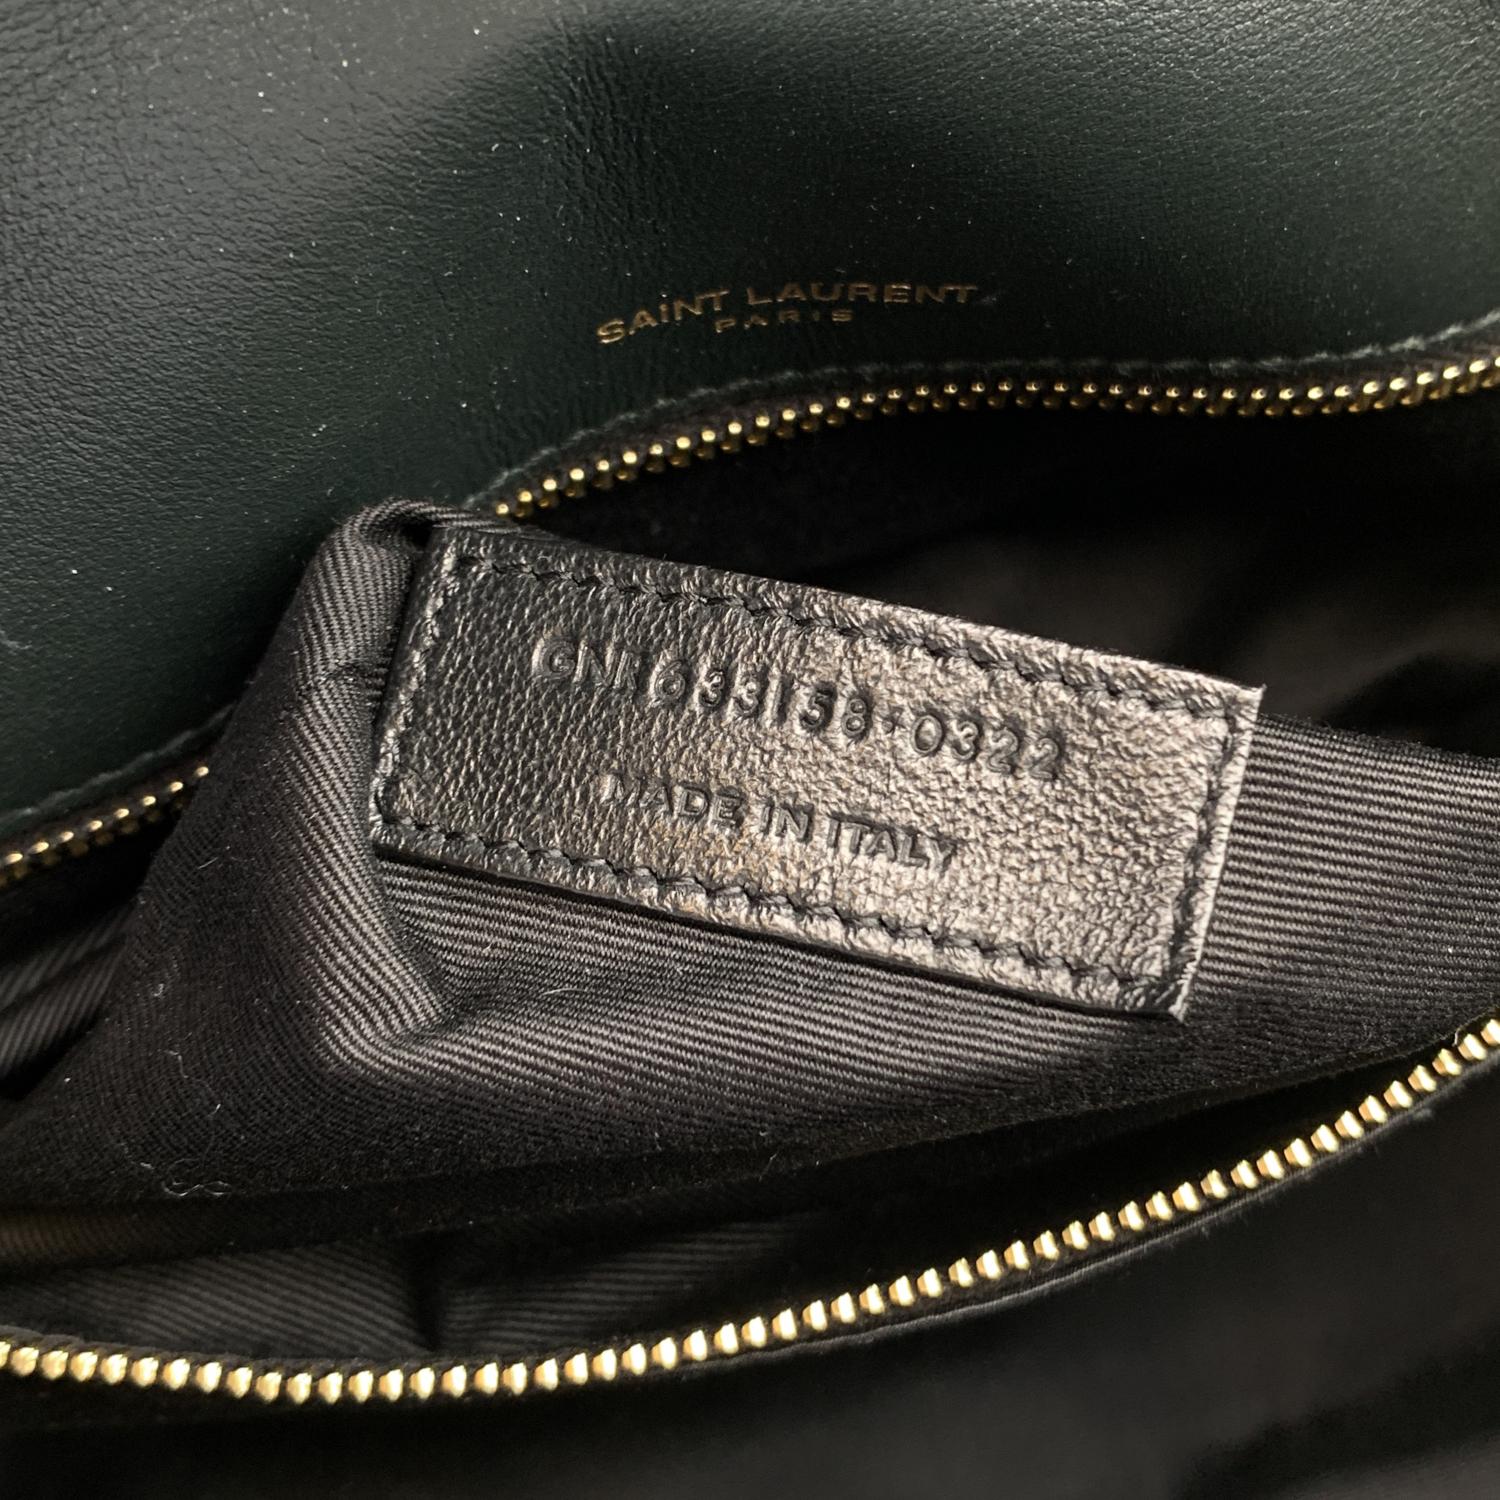 This beautiful Bag will come with a Certificate of Authenticity provided by Entrupy. The certificate will be provided at no further cost.

Iconic SAINT LAURENT 'Niki' in algae green quilted suede. The bag features a front flap with magnetic button